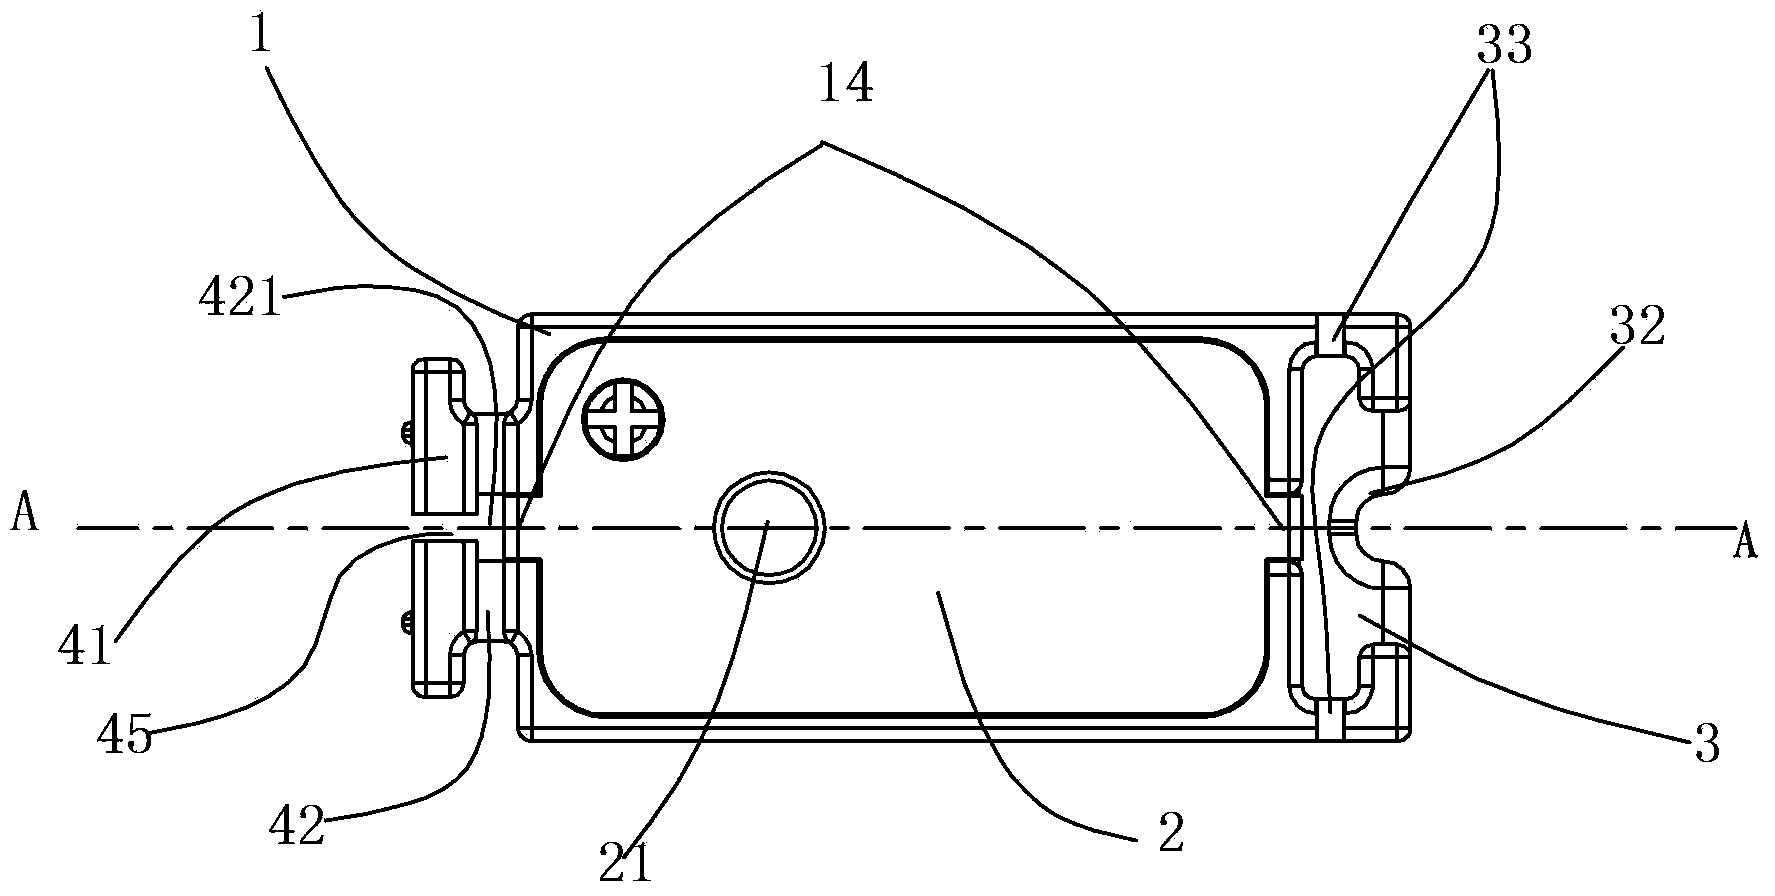 Connection lock catch and necklace provided with same